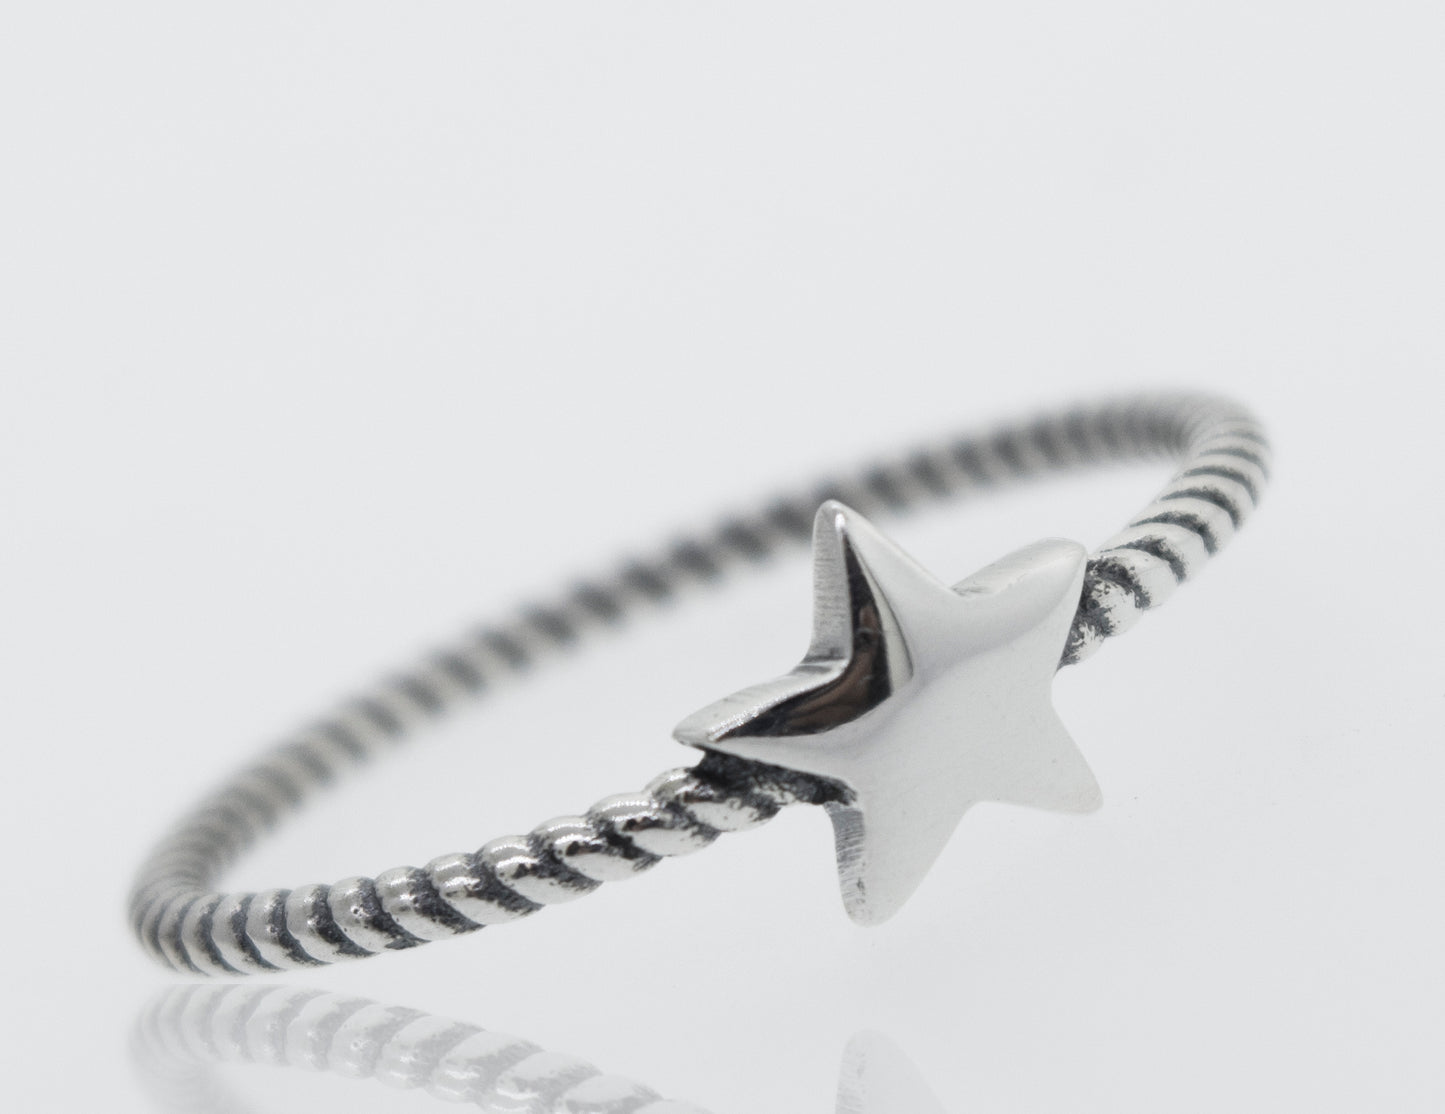 An oxidized Super Silver star ring with a rope design band on a white background.